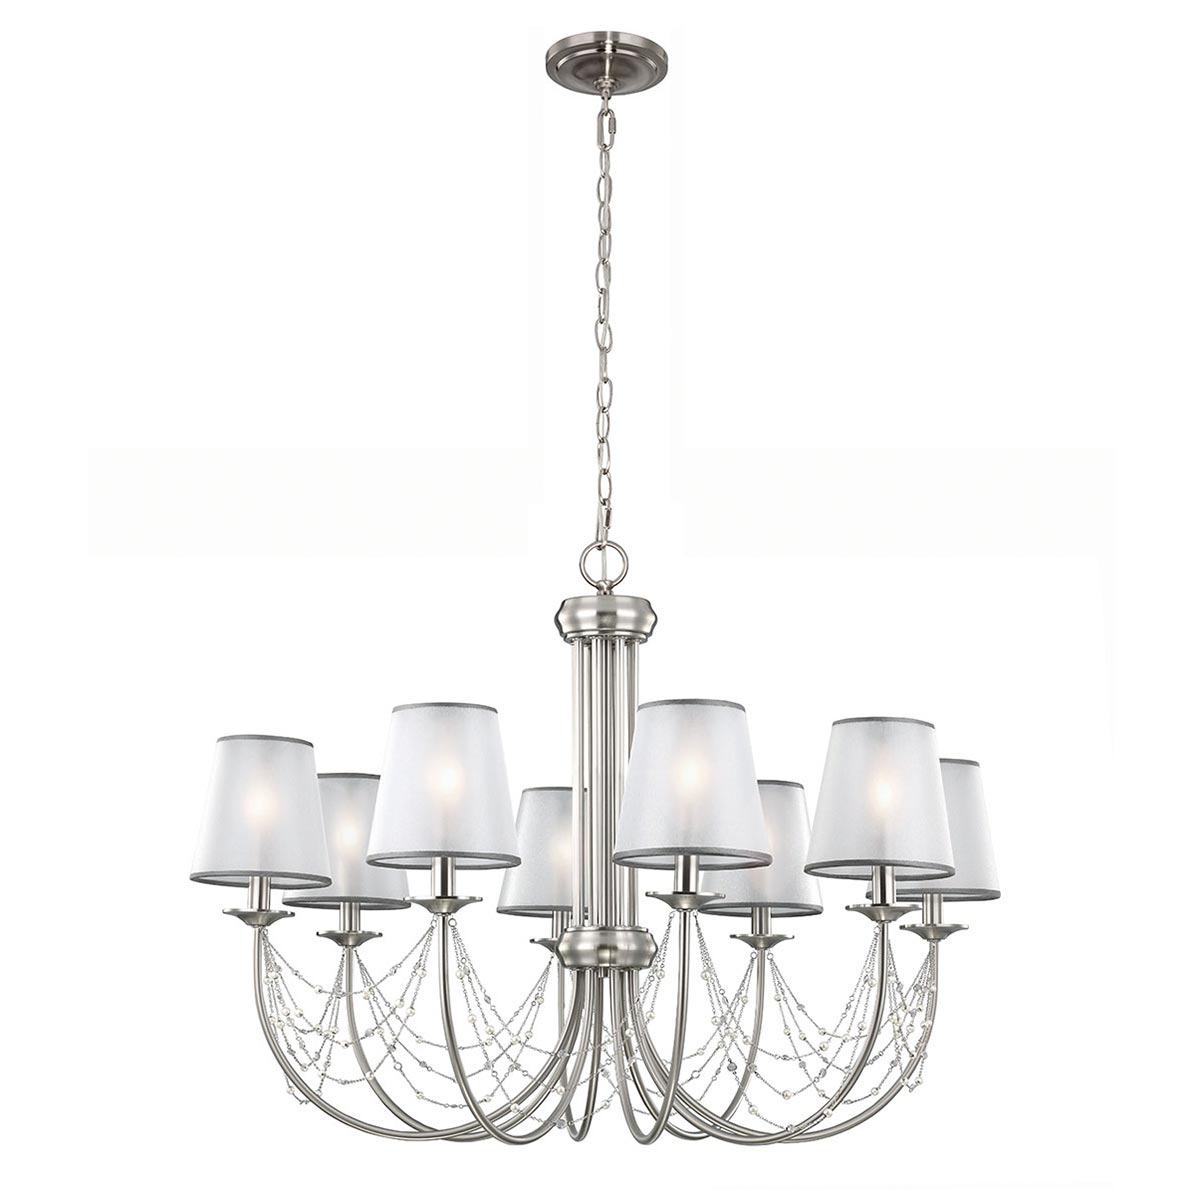 Feiss Aveline Brushed Steel 8 Light Chandelier With Organza Shades